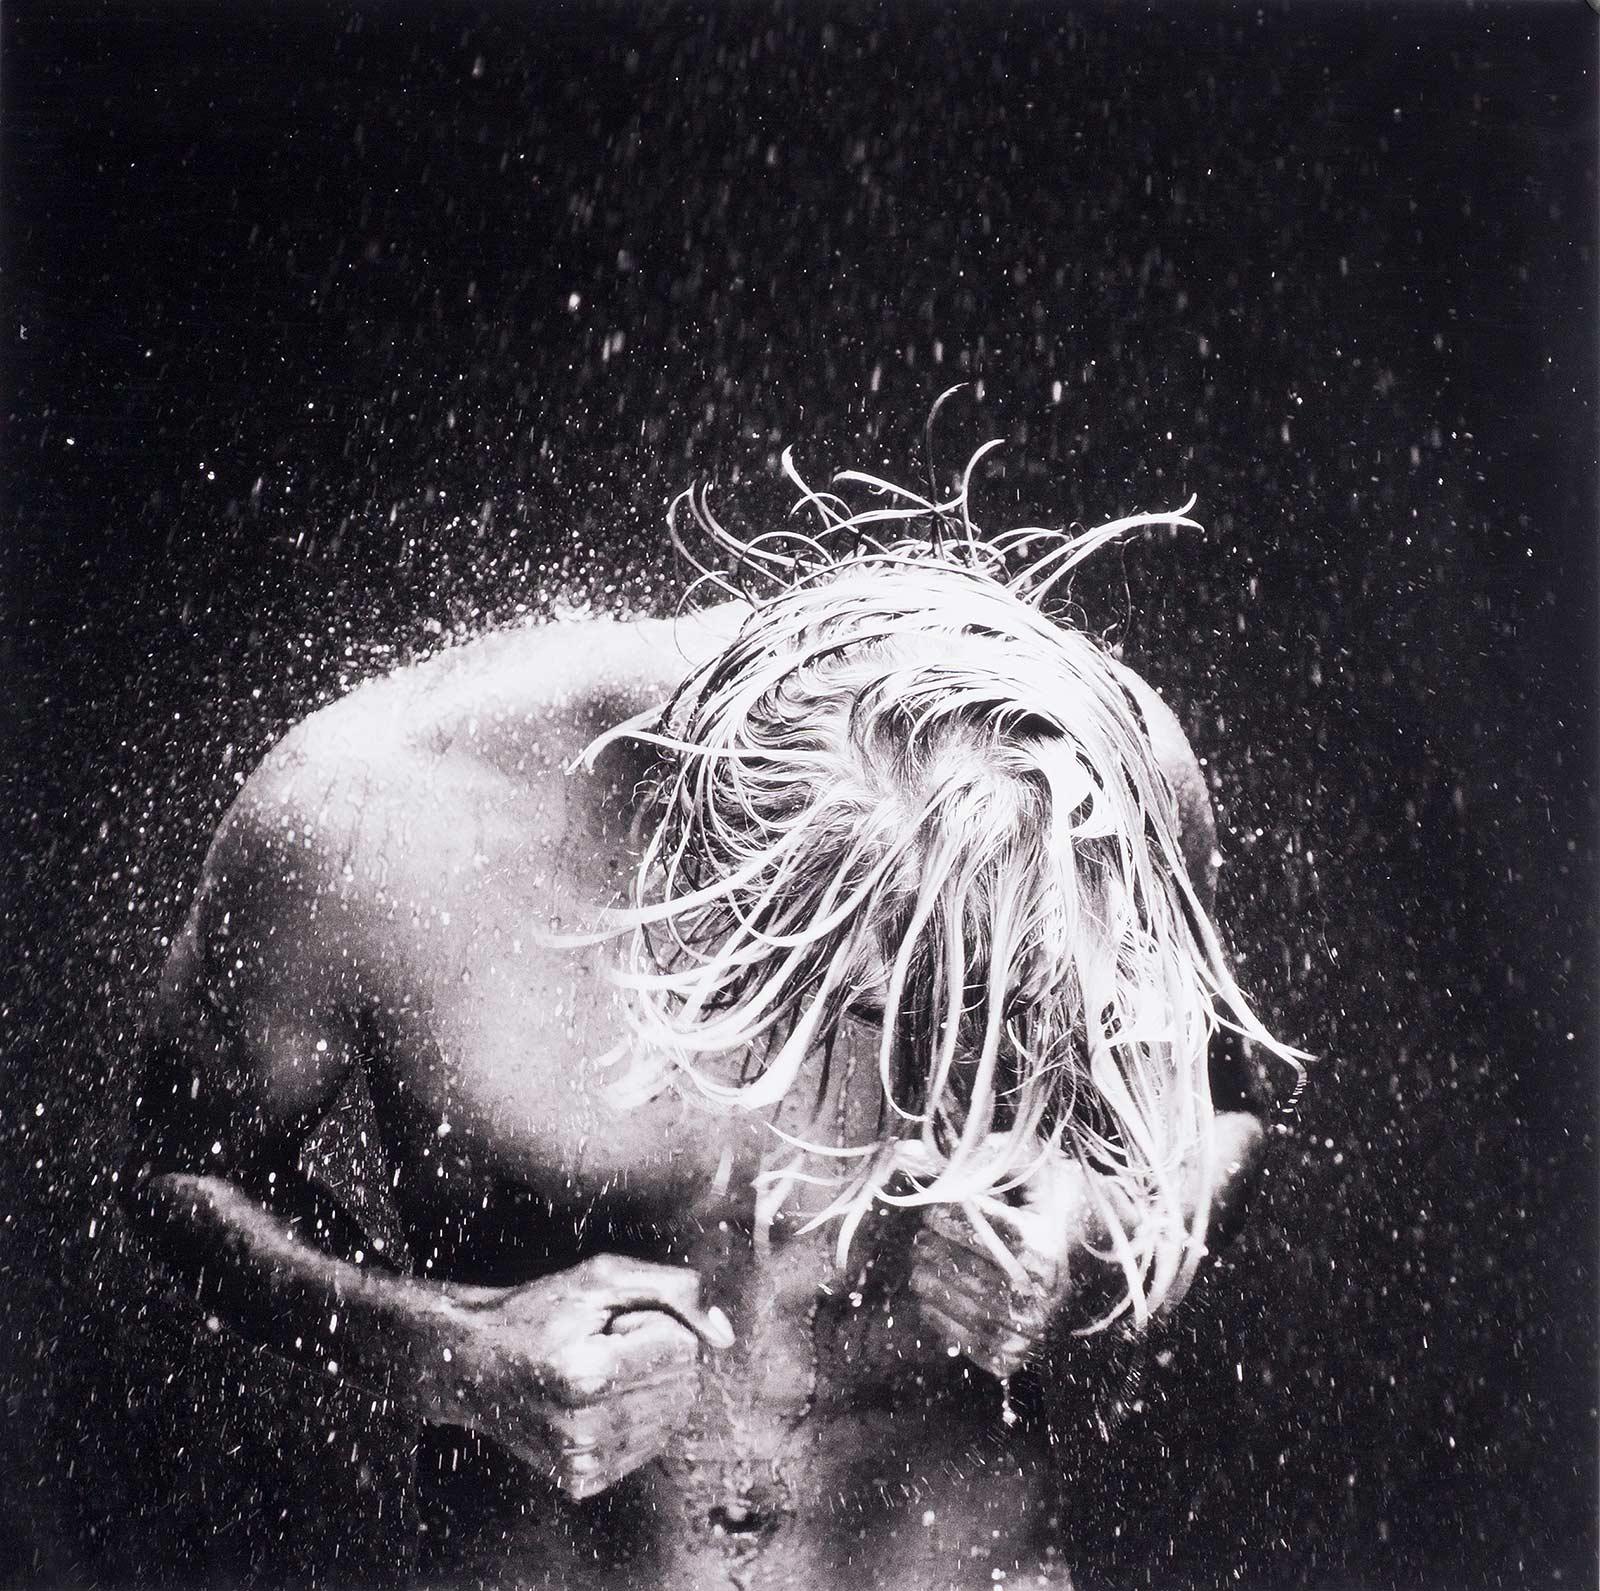 Benno Thoma Black and White Photograph - WET 40 (young nude Dutch boy being doused by droplets of water)